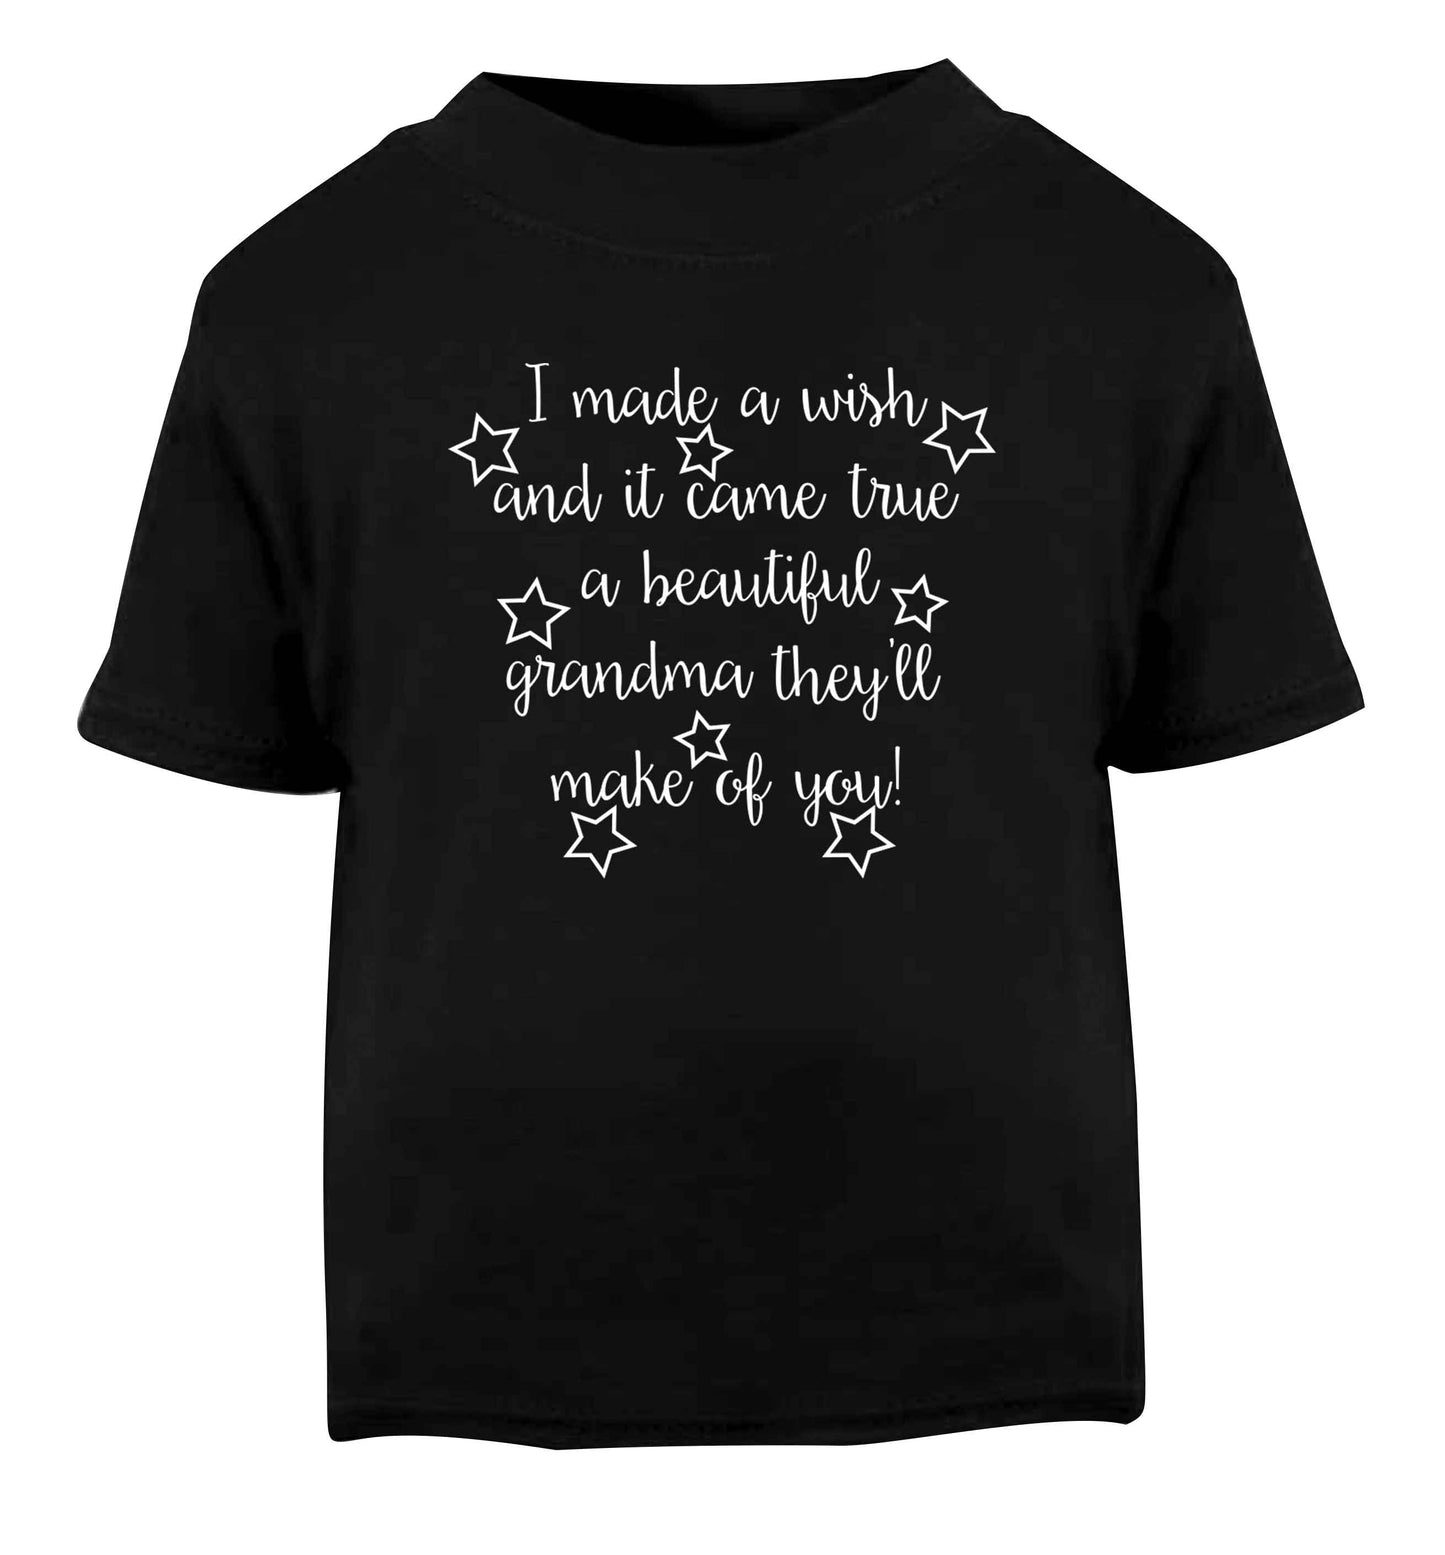 I made a wish and it came true a beautiful grandma they'll make of you! Black Baby Toddler Tshirt 2 years